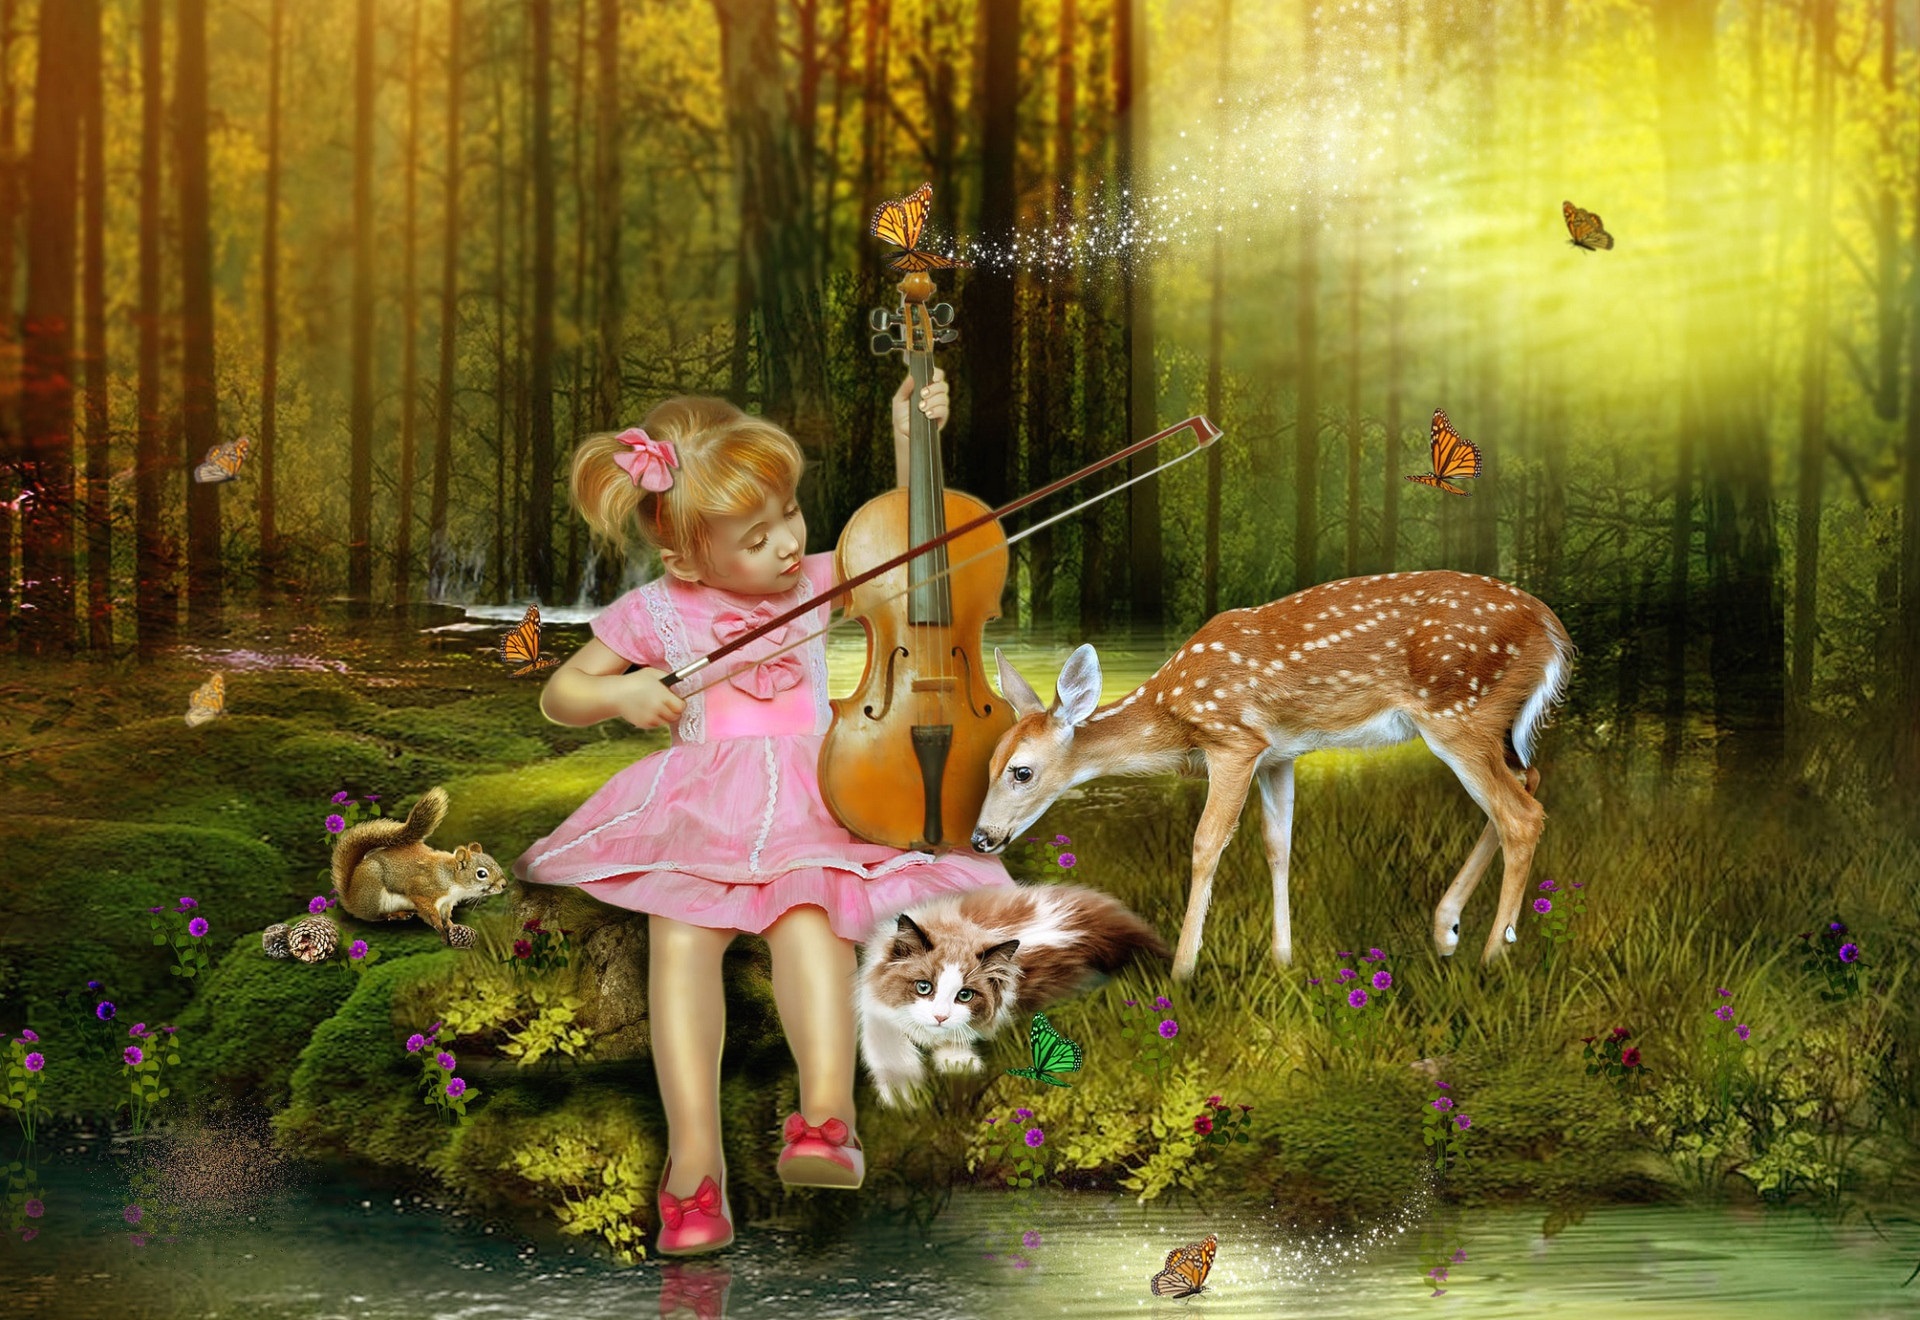 Fantasy Child Cool Alone Art
 Wallpapers